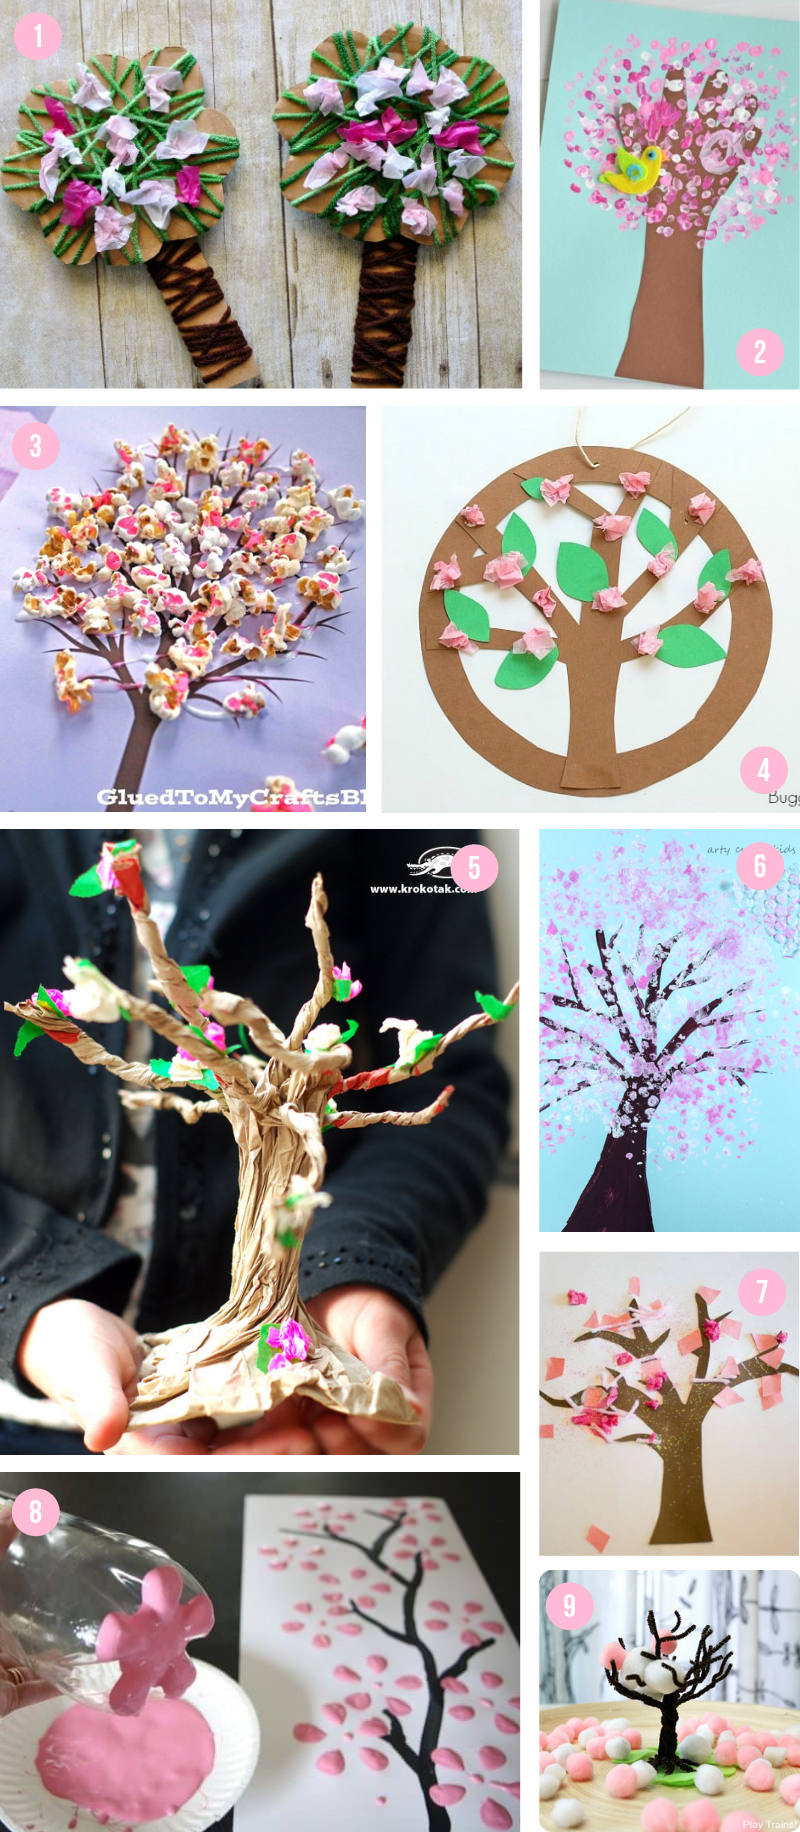 The Epic Collection Of Spring Crafts For Kids - All The Best Art